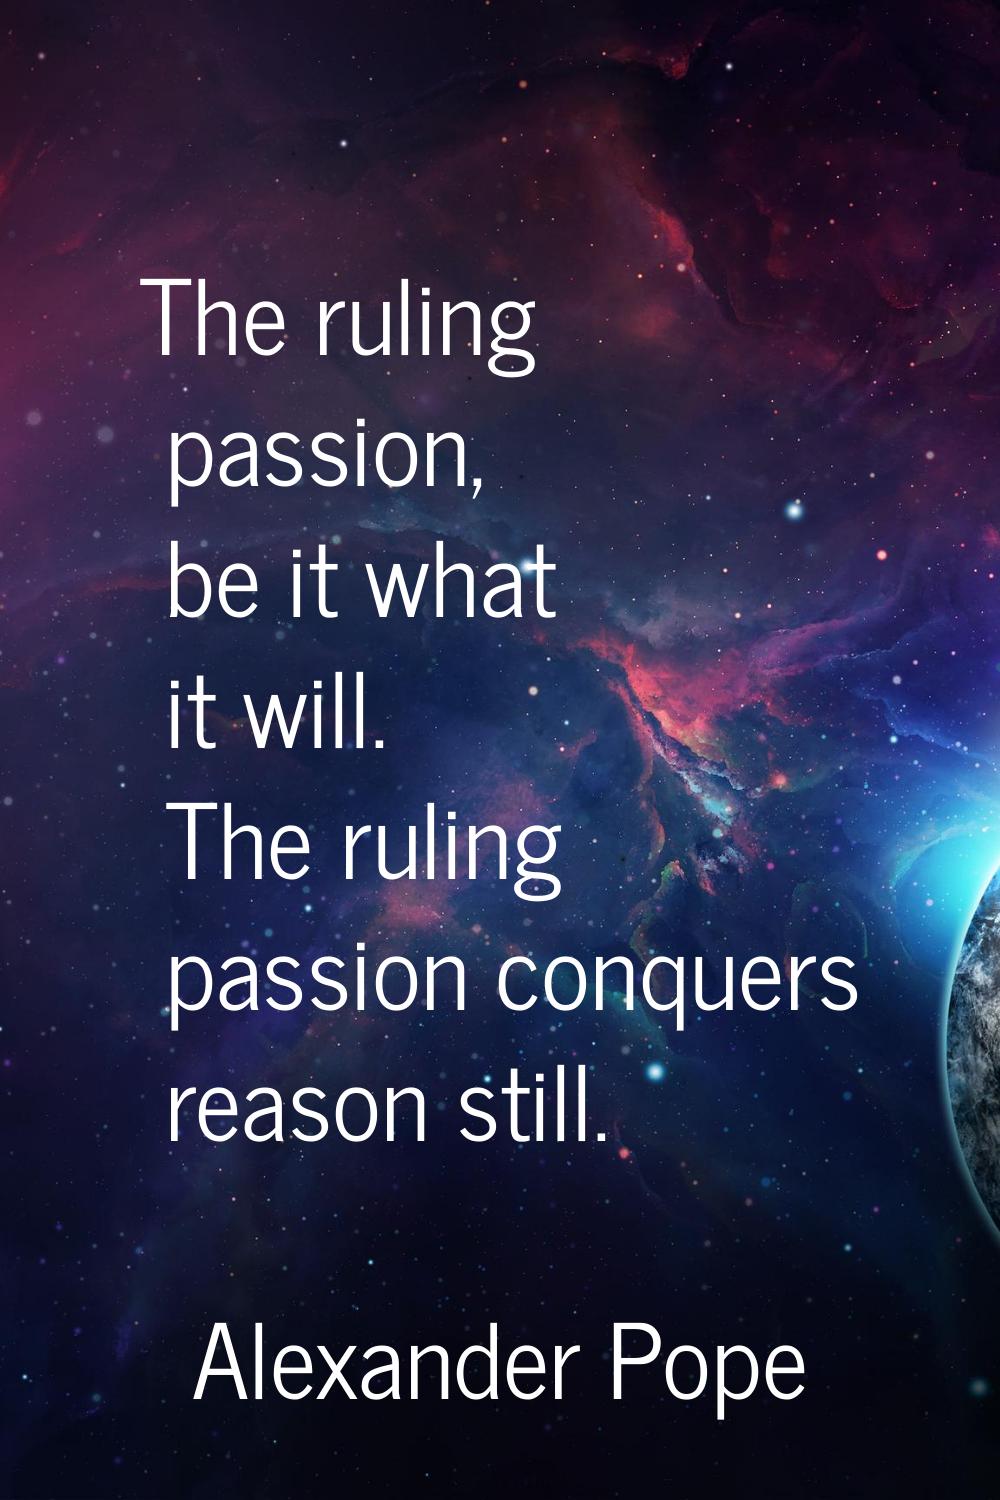 The ruling passion, be it what it will. The ruling passion conquers reason still.